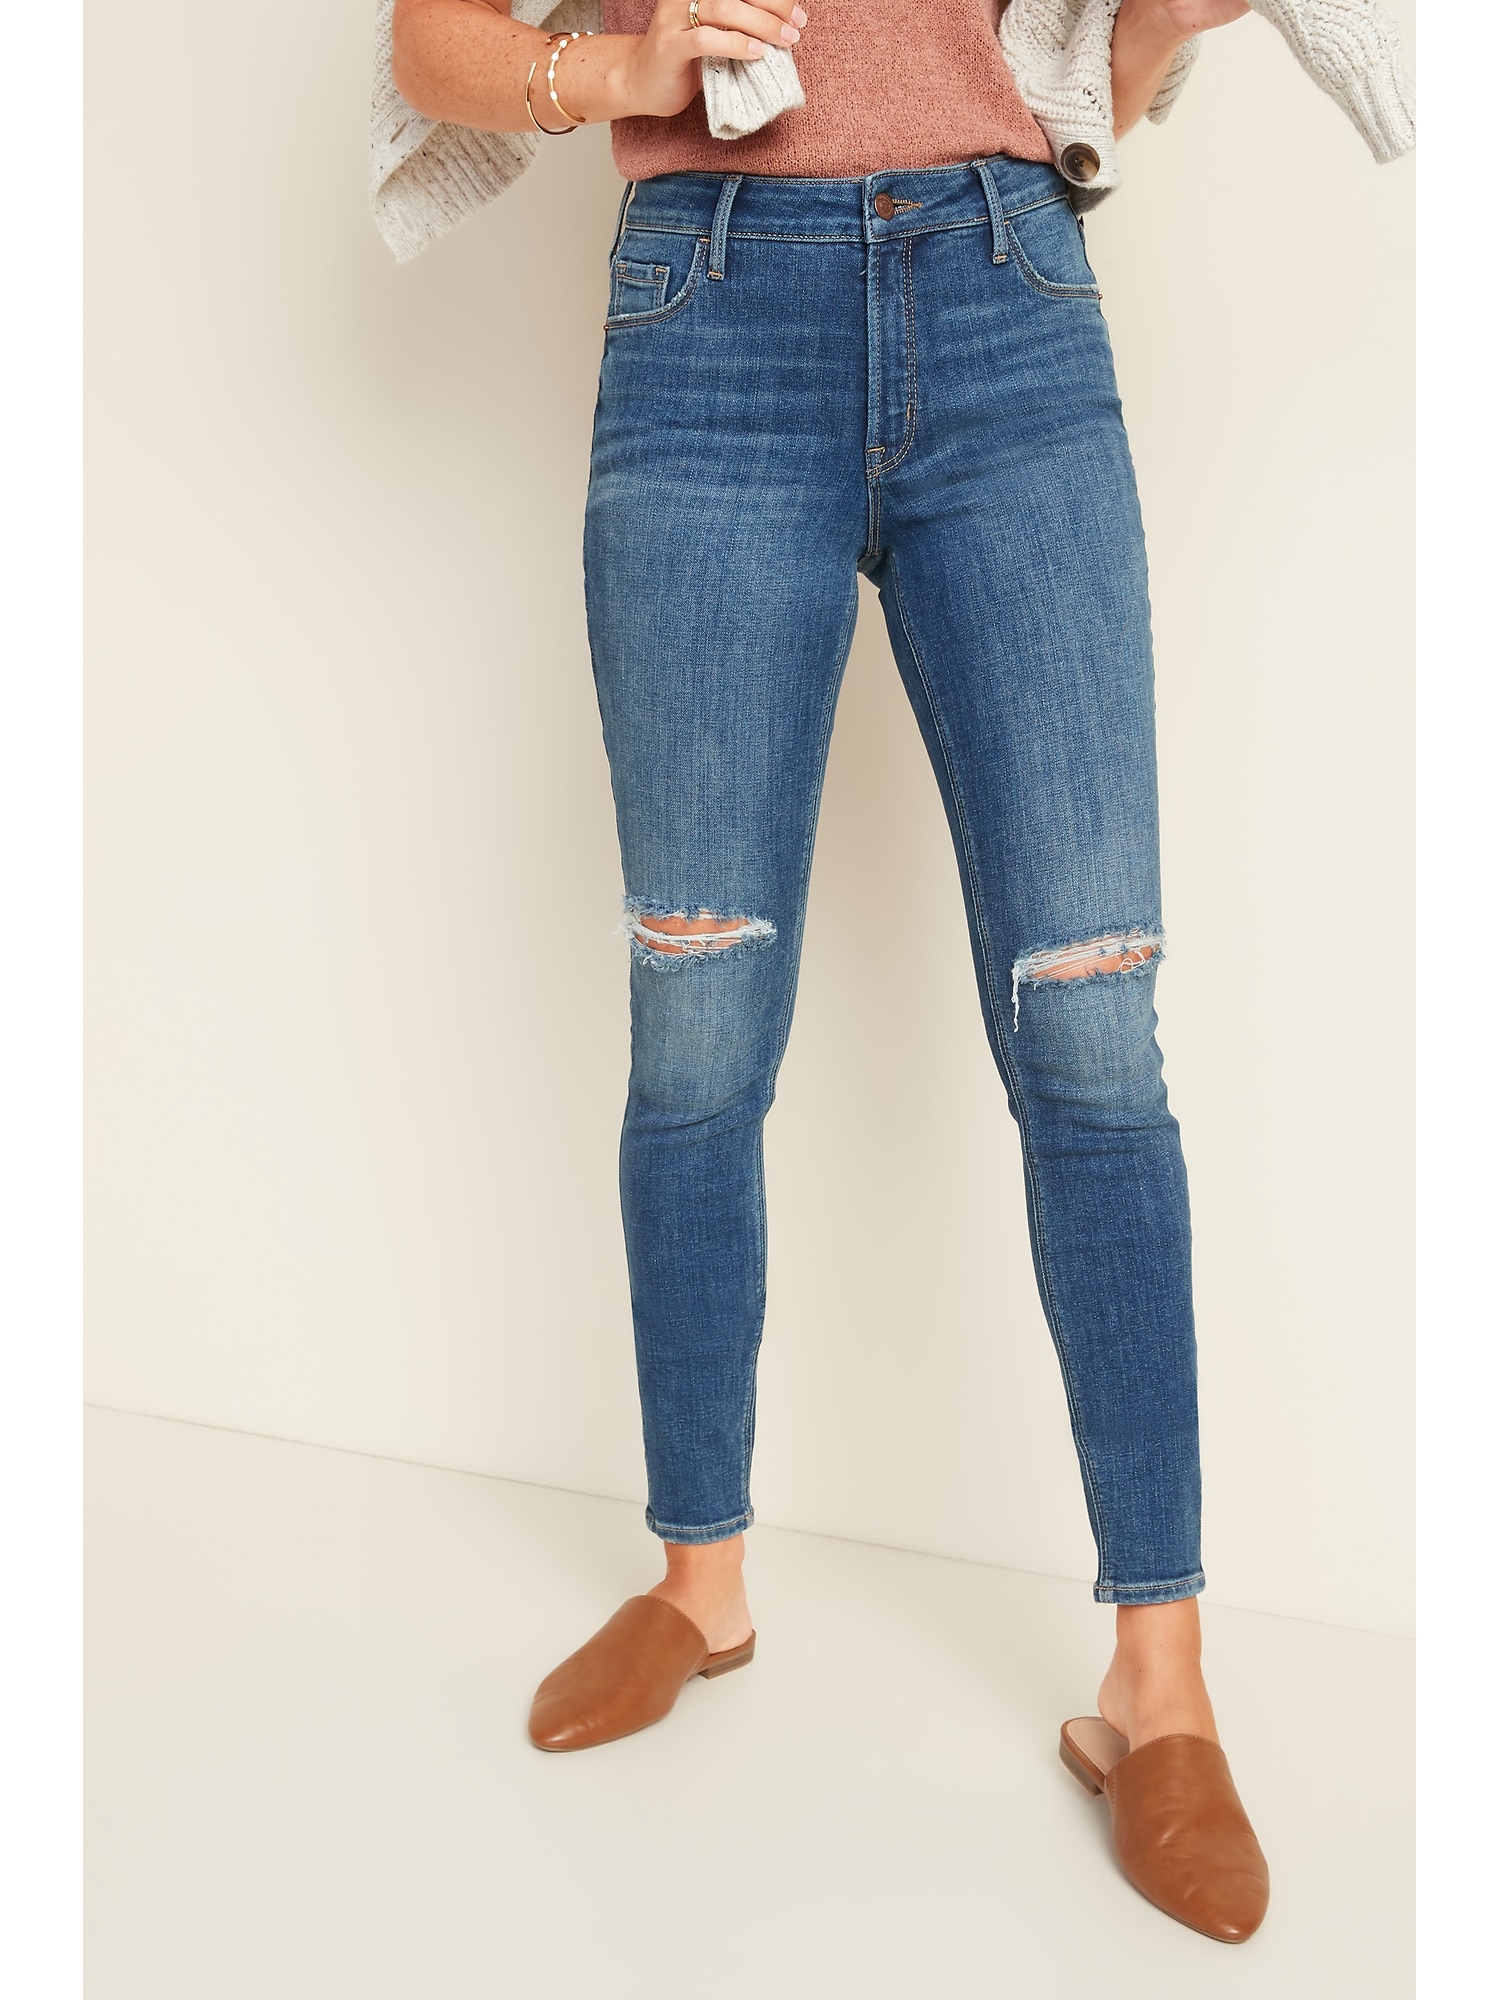 High-Waisted Rockstar Super Skinny Ripped Jeans Old Navy